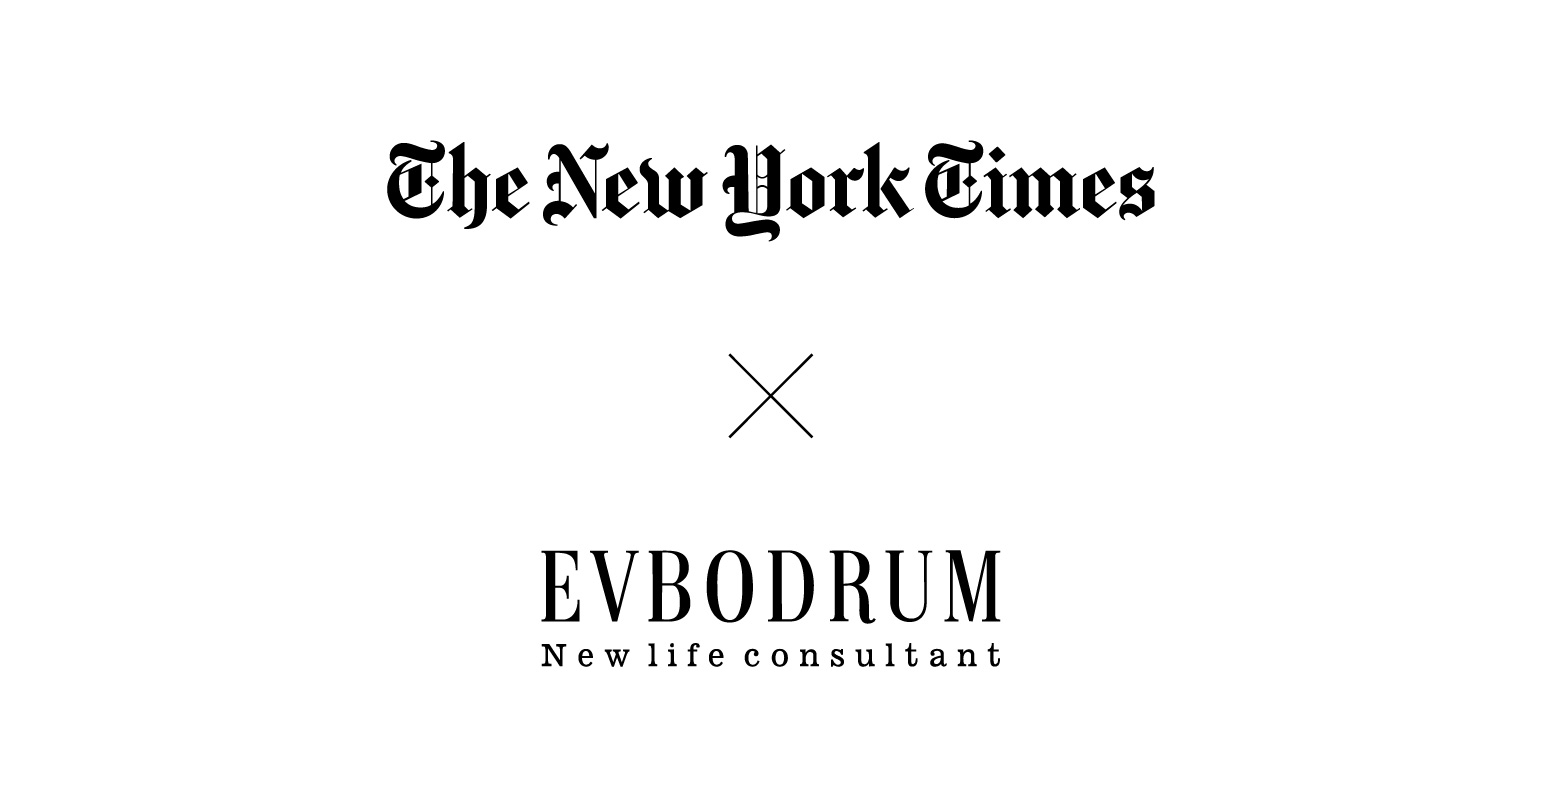 EVBodrum in The New York Times '19